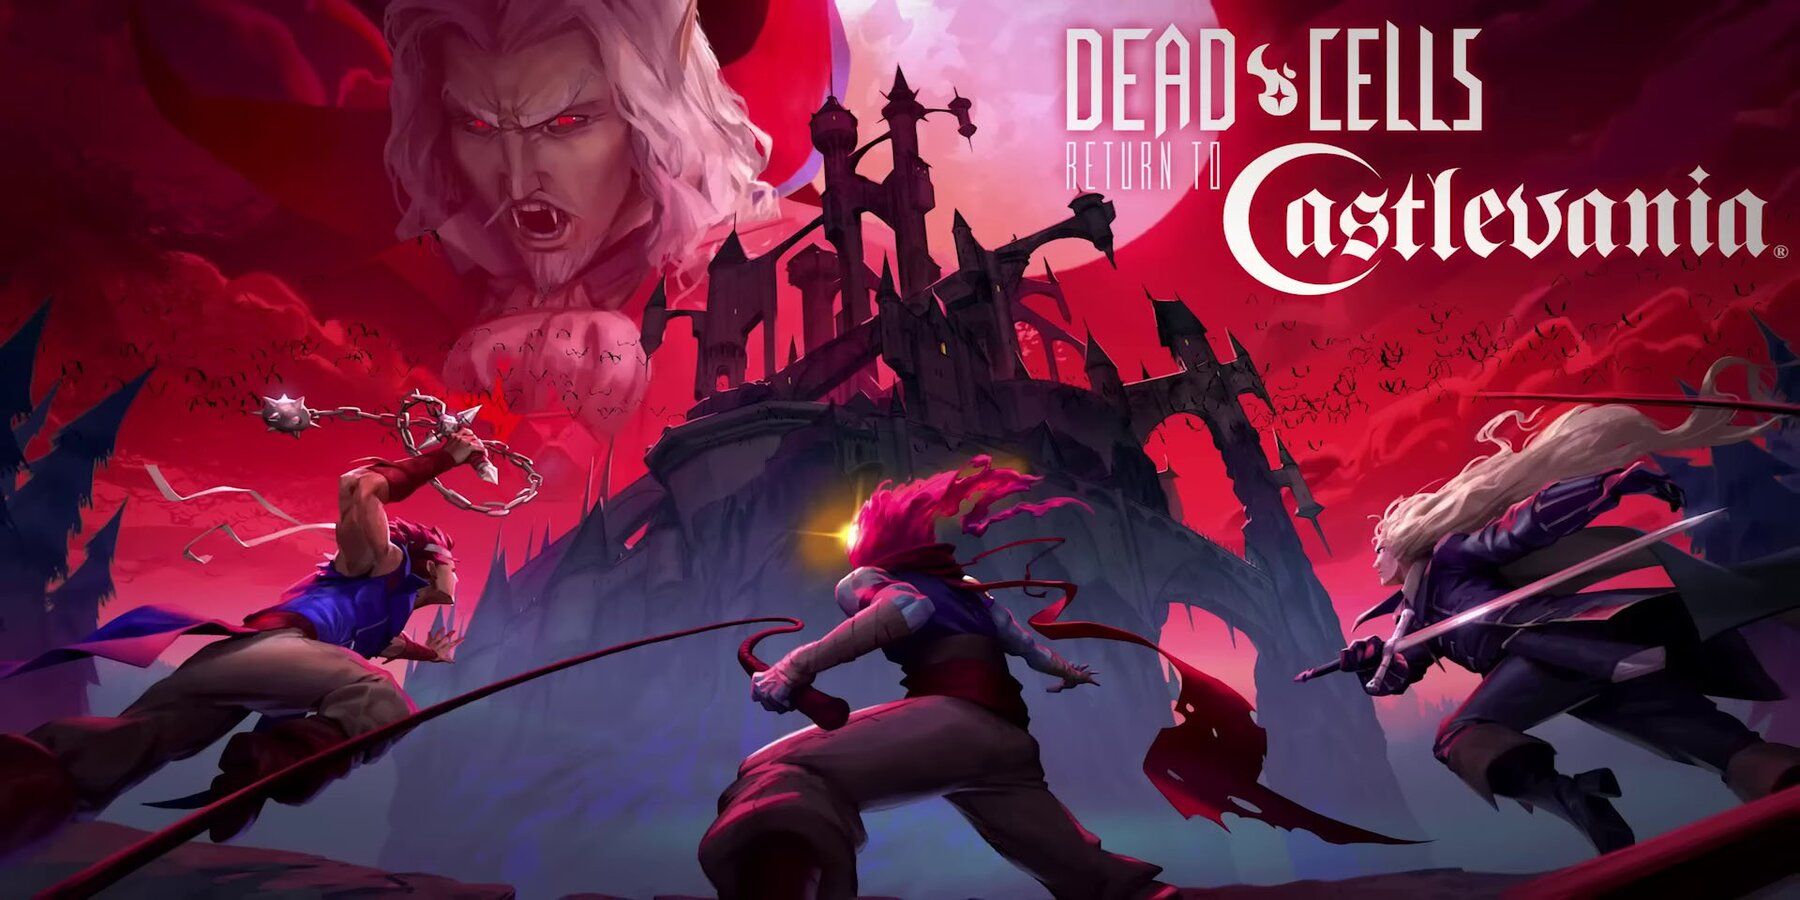 Dead Cells: Return to Castlevania Console Listing Appears Online